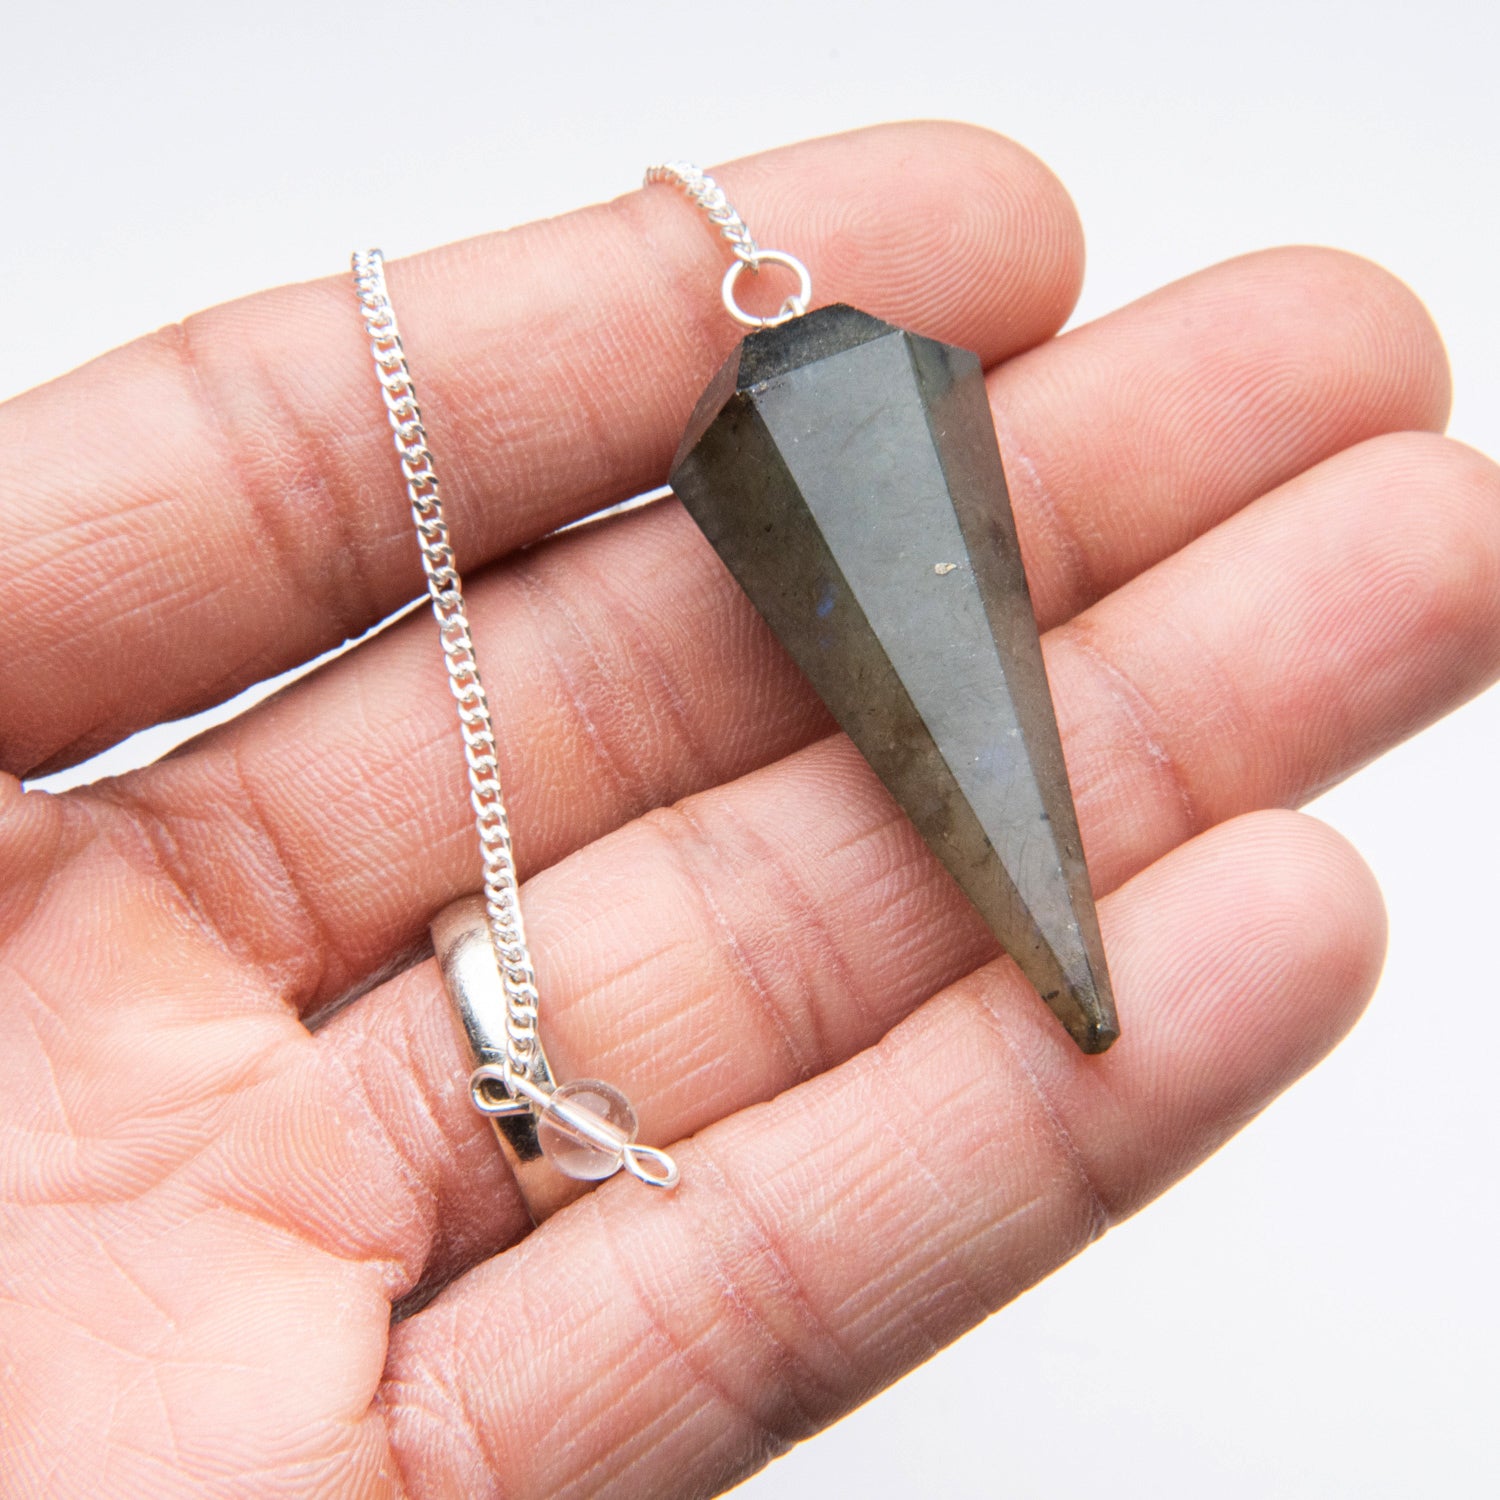 Genuine Polished Labradorite Pendulum (with Chain) with black velvet pouch